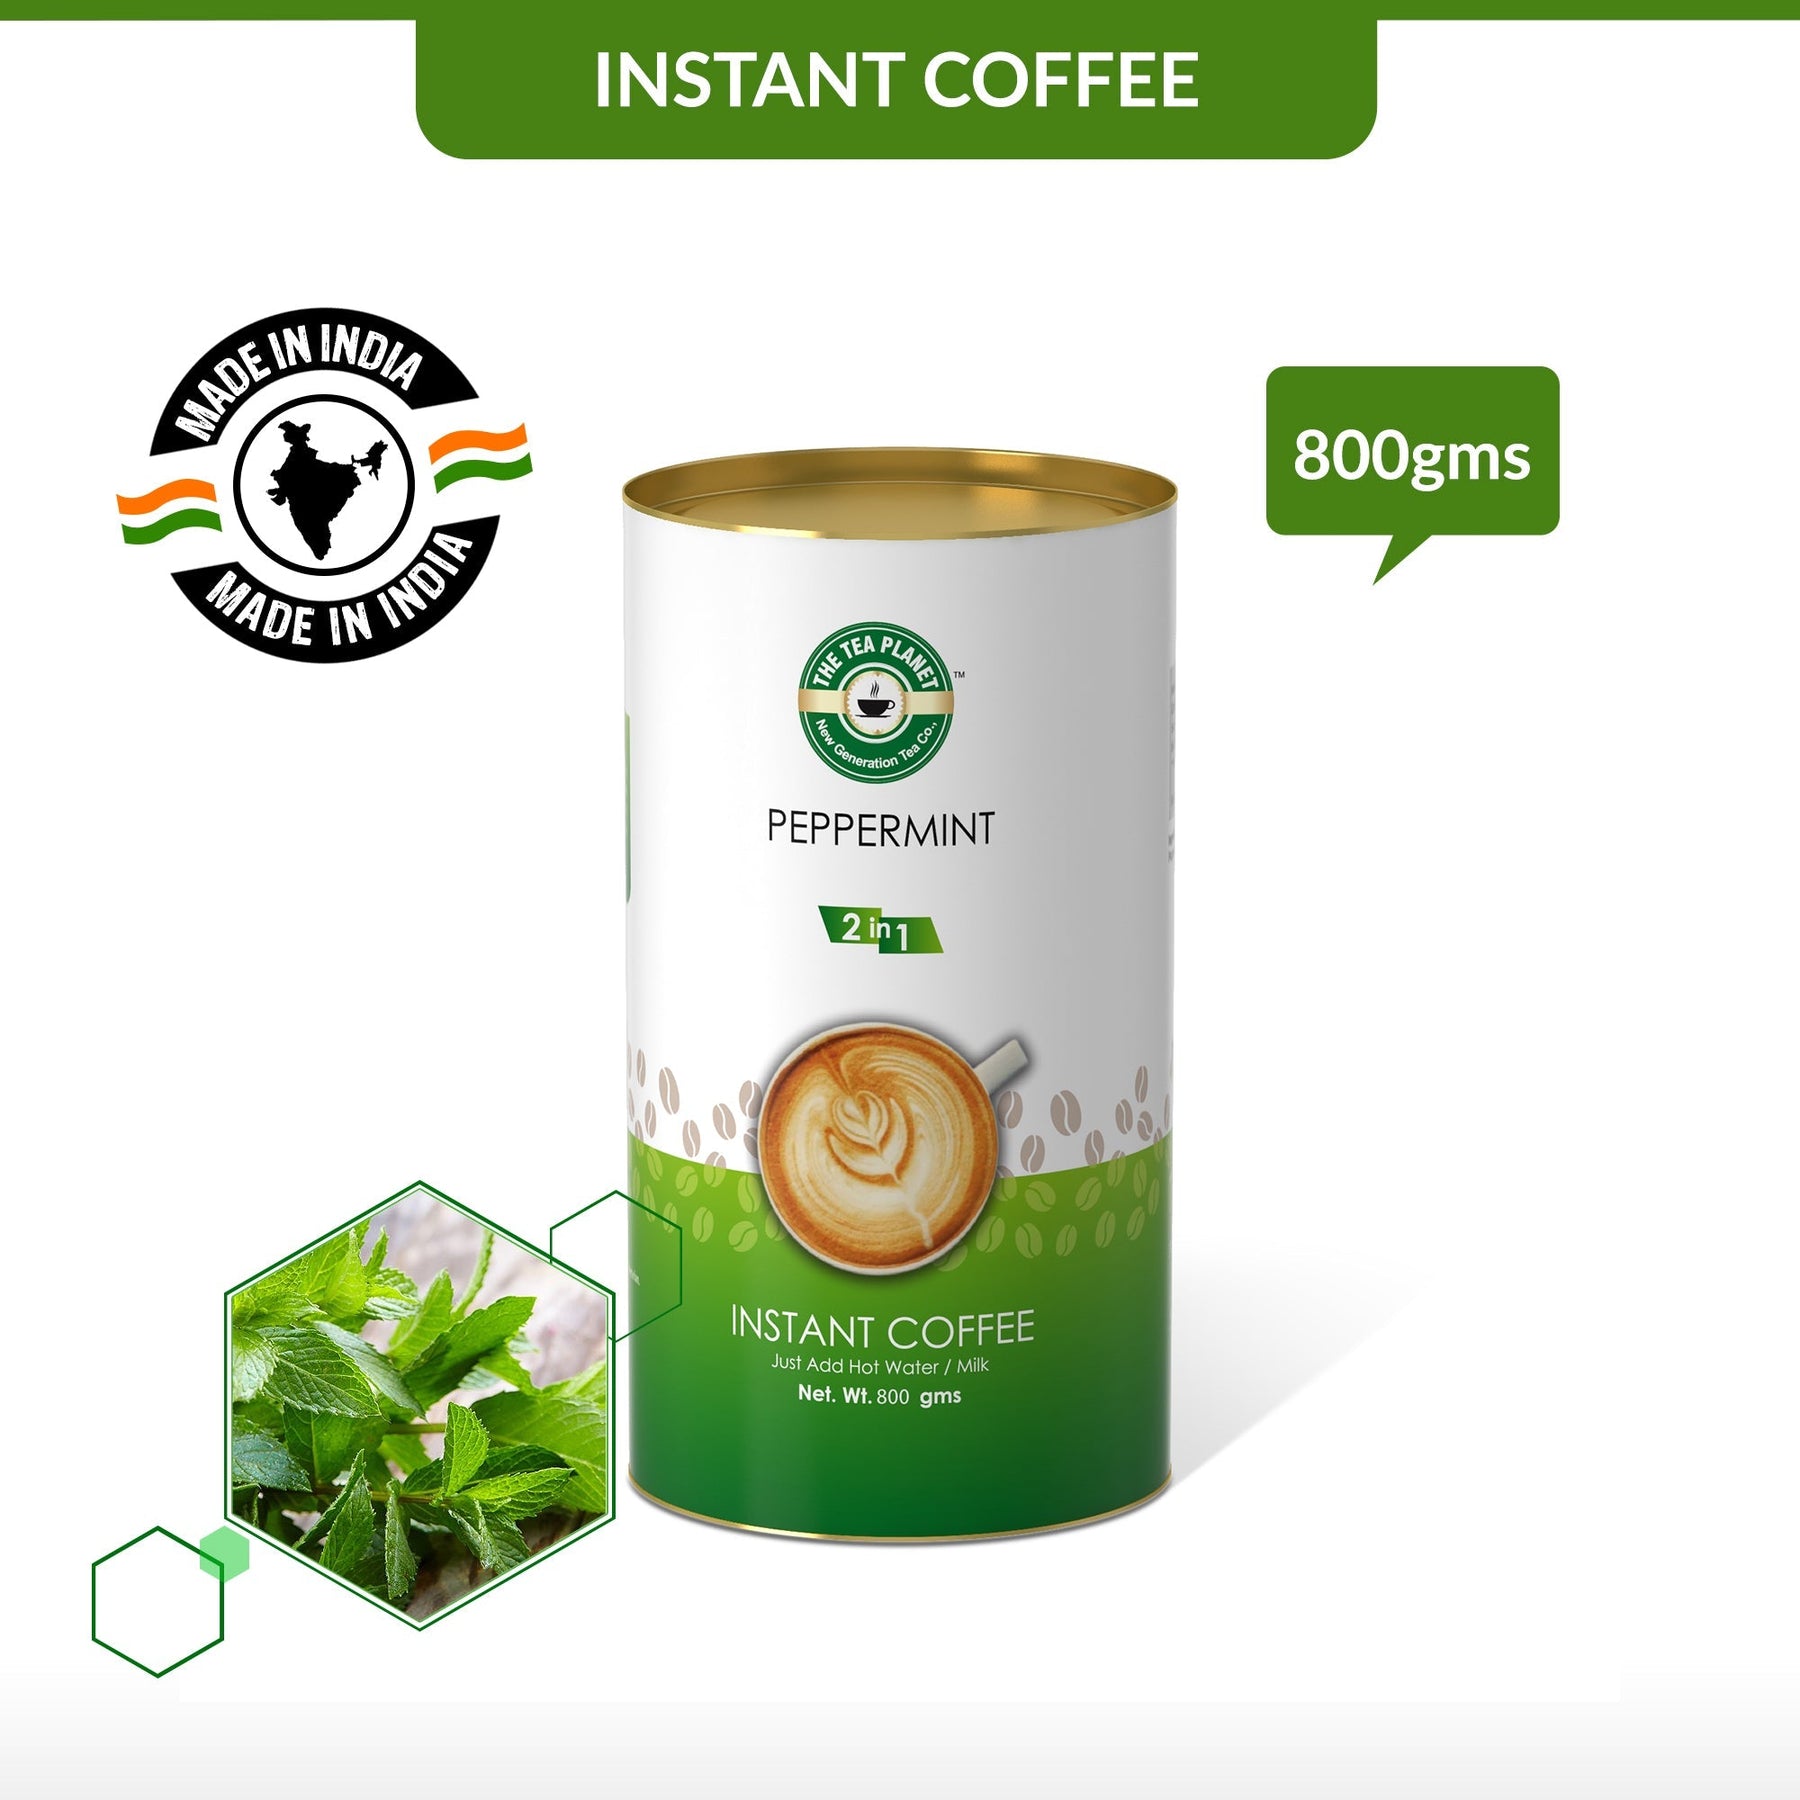 Peppermint Instant Coffee Premix (2 in 1) - 800 gms